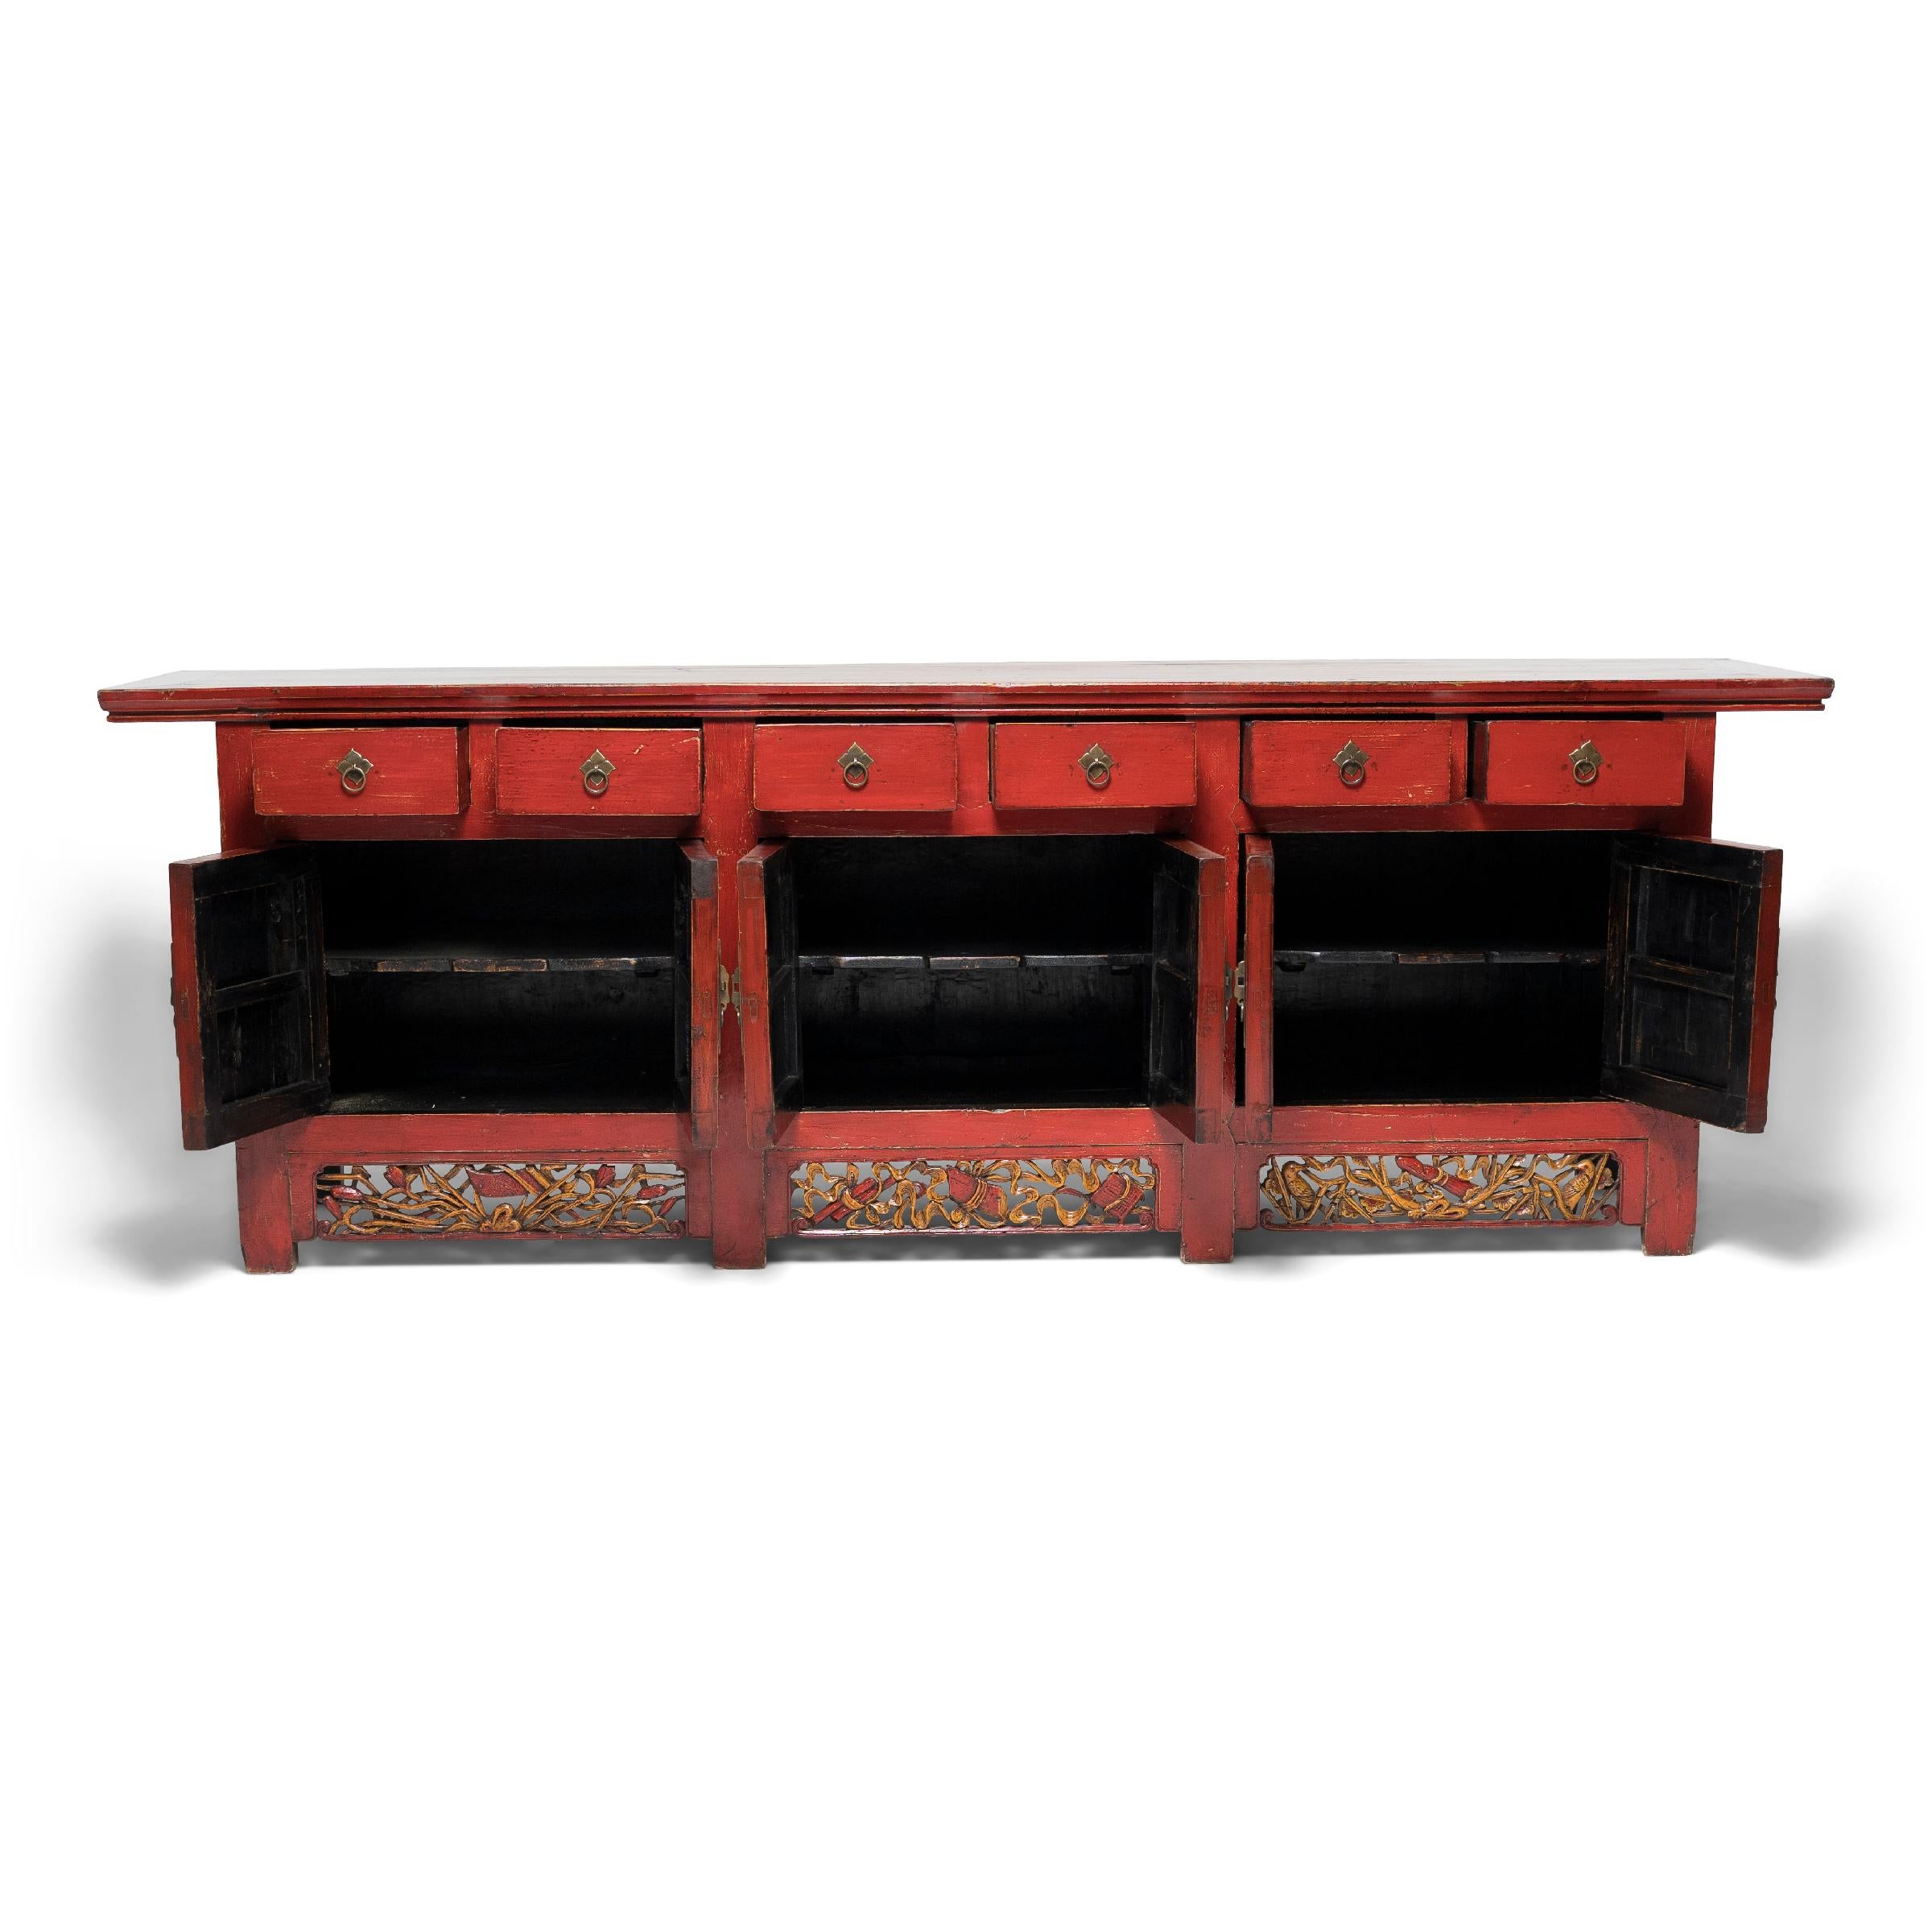 20th Century Chinese Red Lacquer Coffer with Gilt Carvings, c. 1900 For Sale